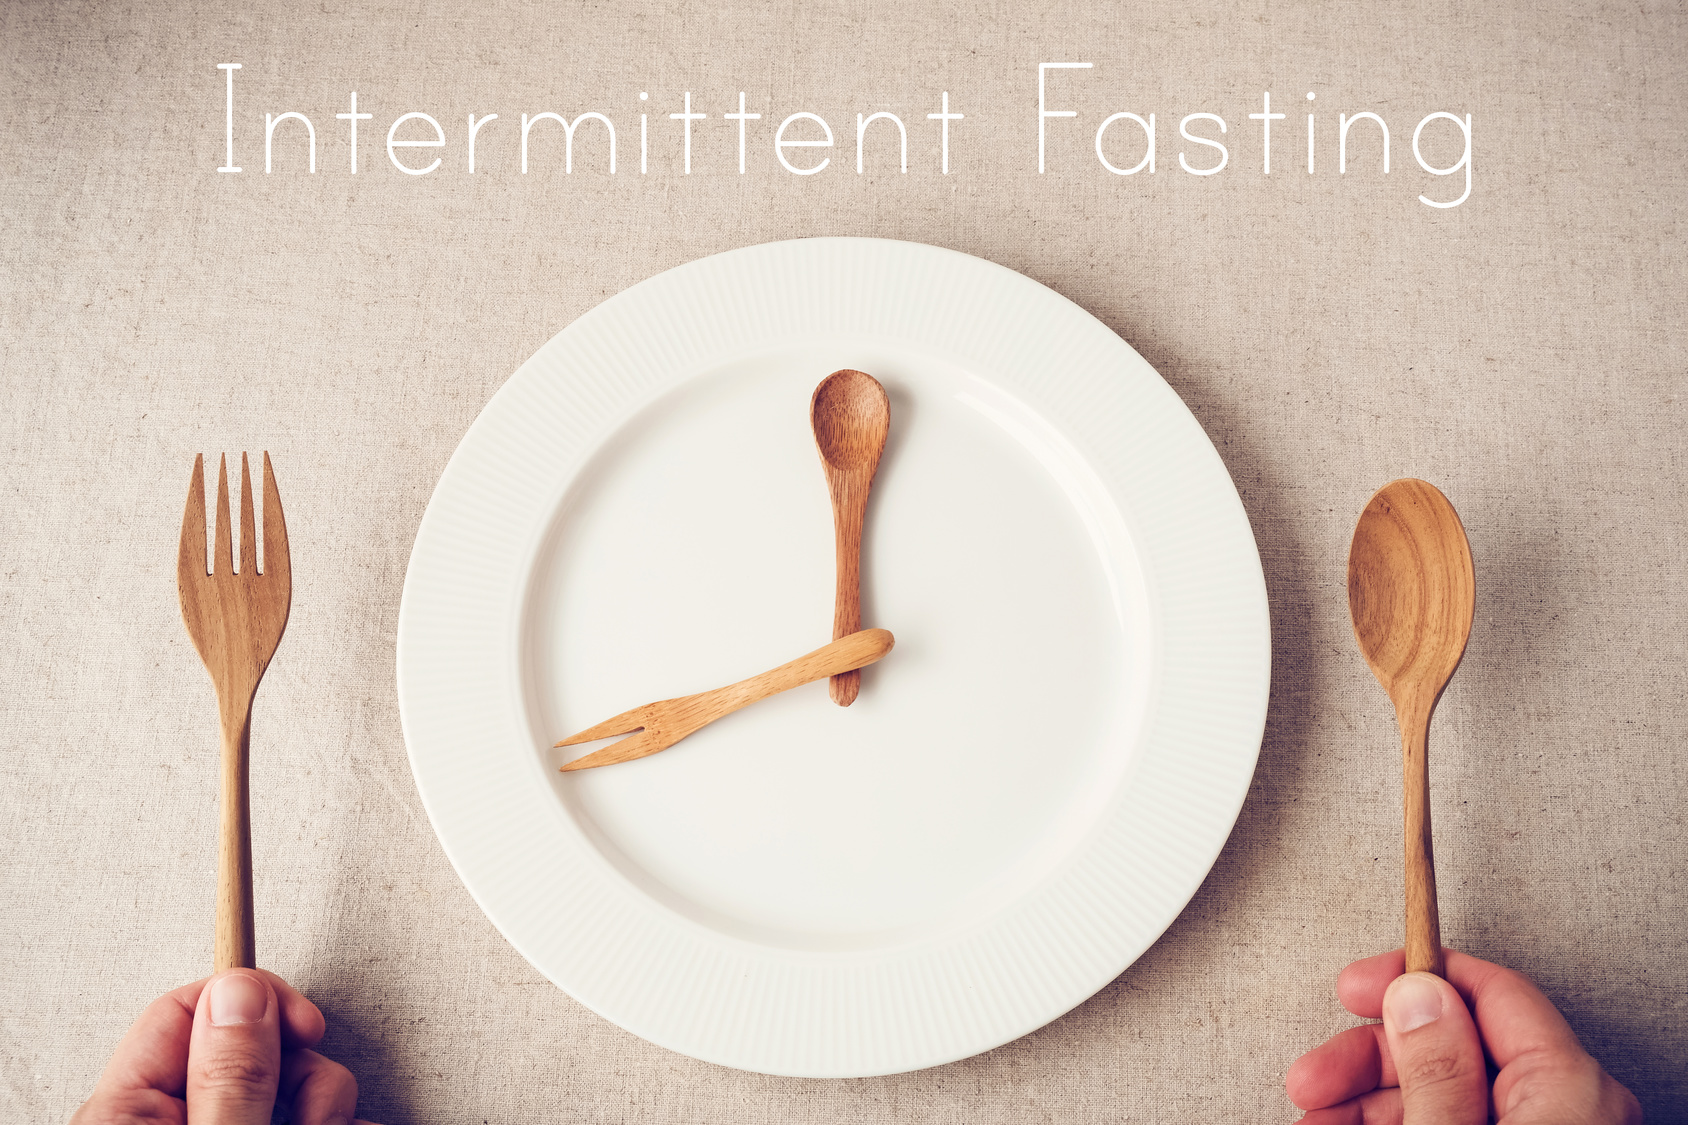 Intermittent Fasting – The Good, The Bad And The Ugly